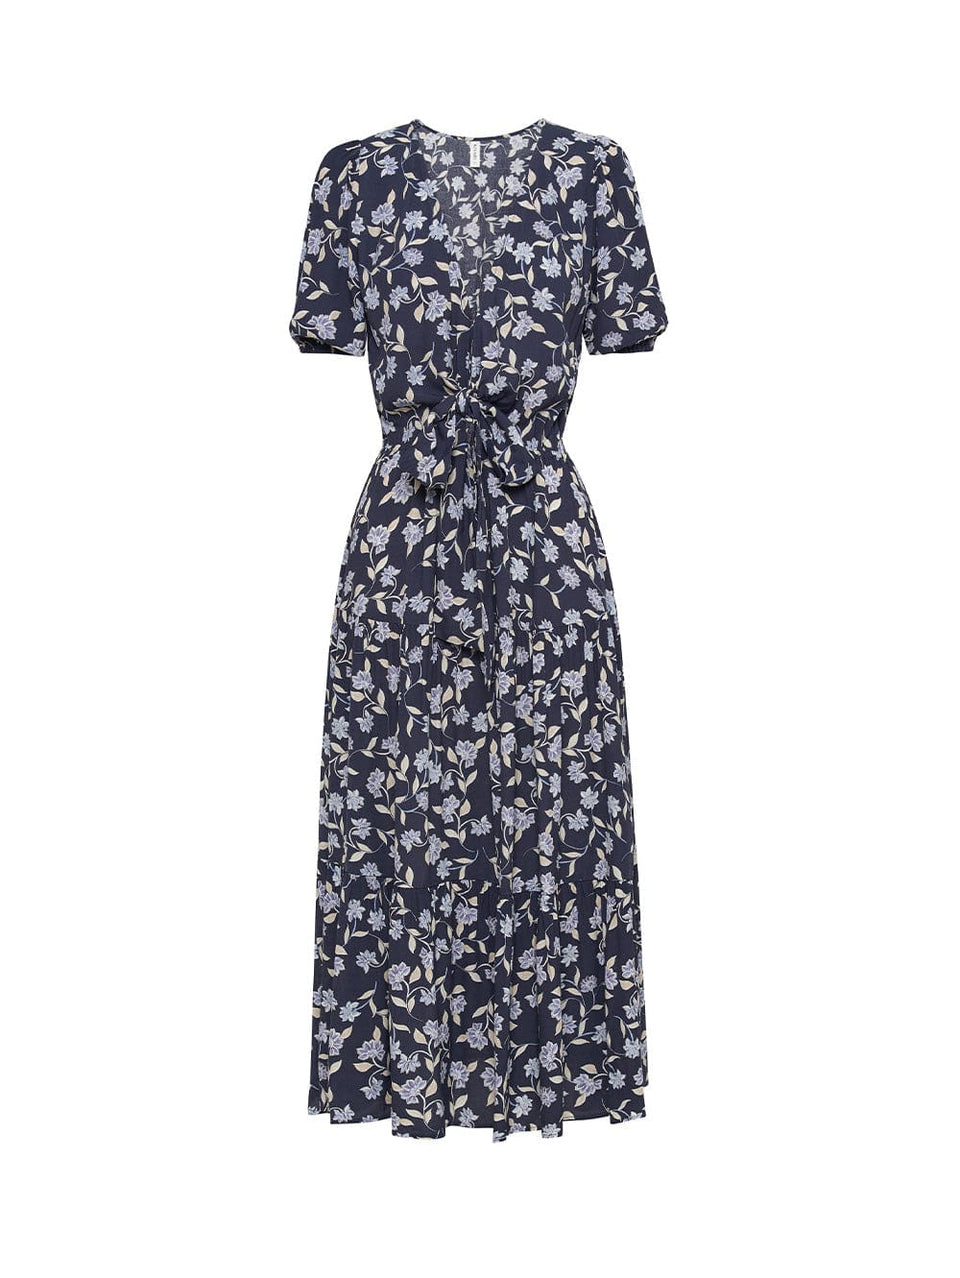 Ghost image of the KIVARI Jeanne Tie Front Midi Dress: A navy and sky blue floral dress made from sustainable LENZING Viscose Crepe and featuring a tie front, elasticated waist, short puff sleeves and tiered skirt.